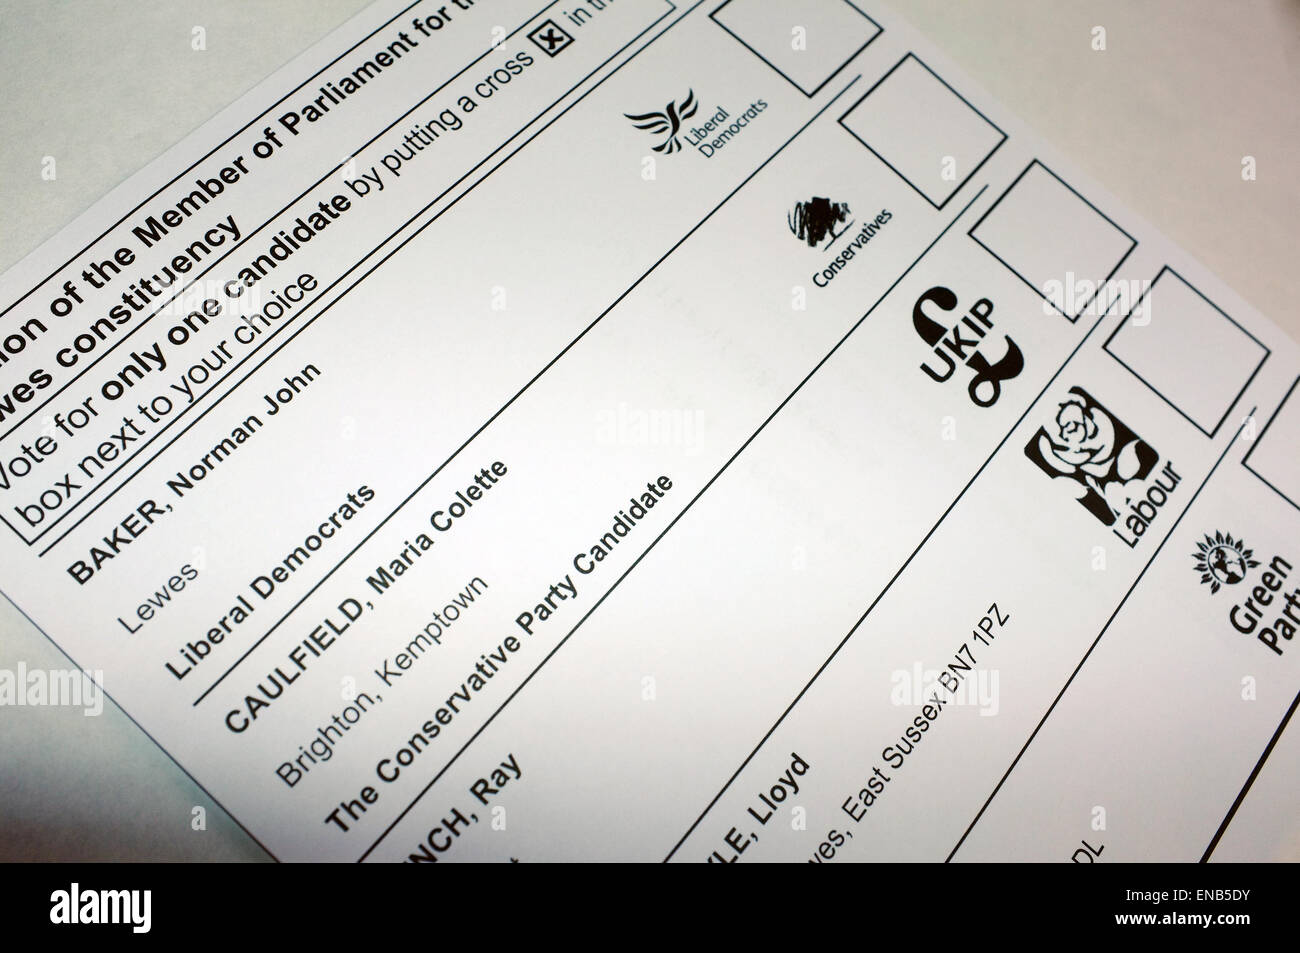 The candidate options on postal vote ballot paper for the 2015 UK General Election. Stock Photo